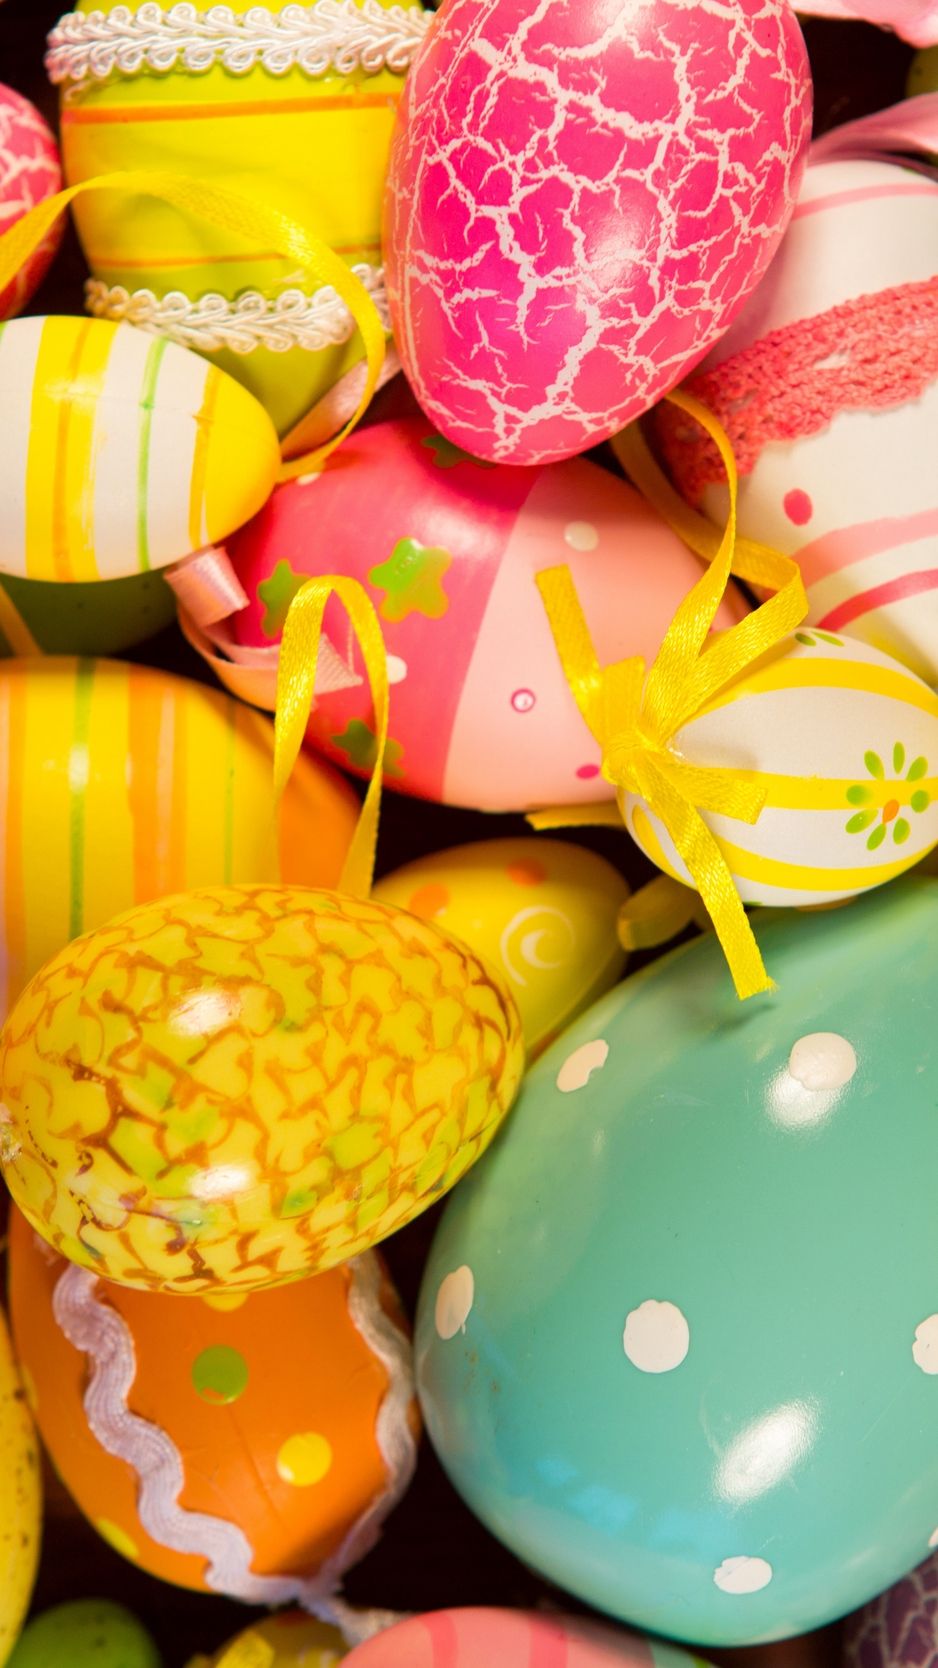 Download wallpaper 938x1668 easter eggs, easter, painted eggs